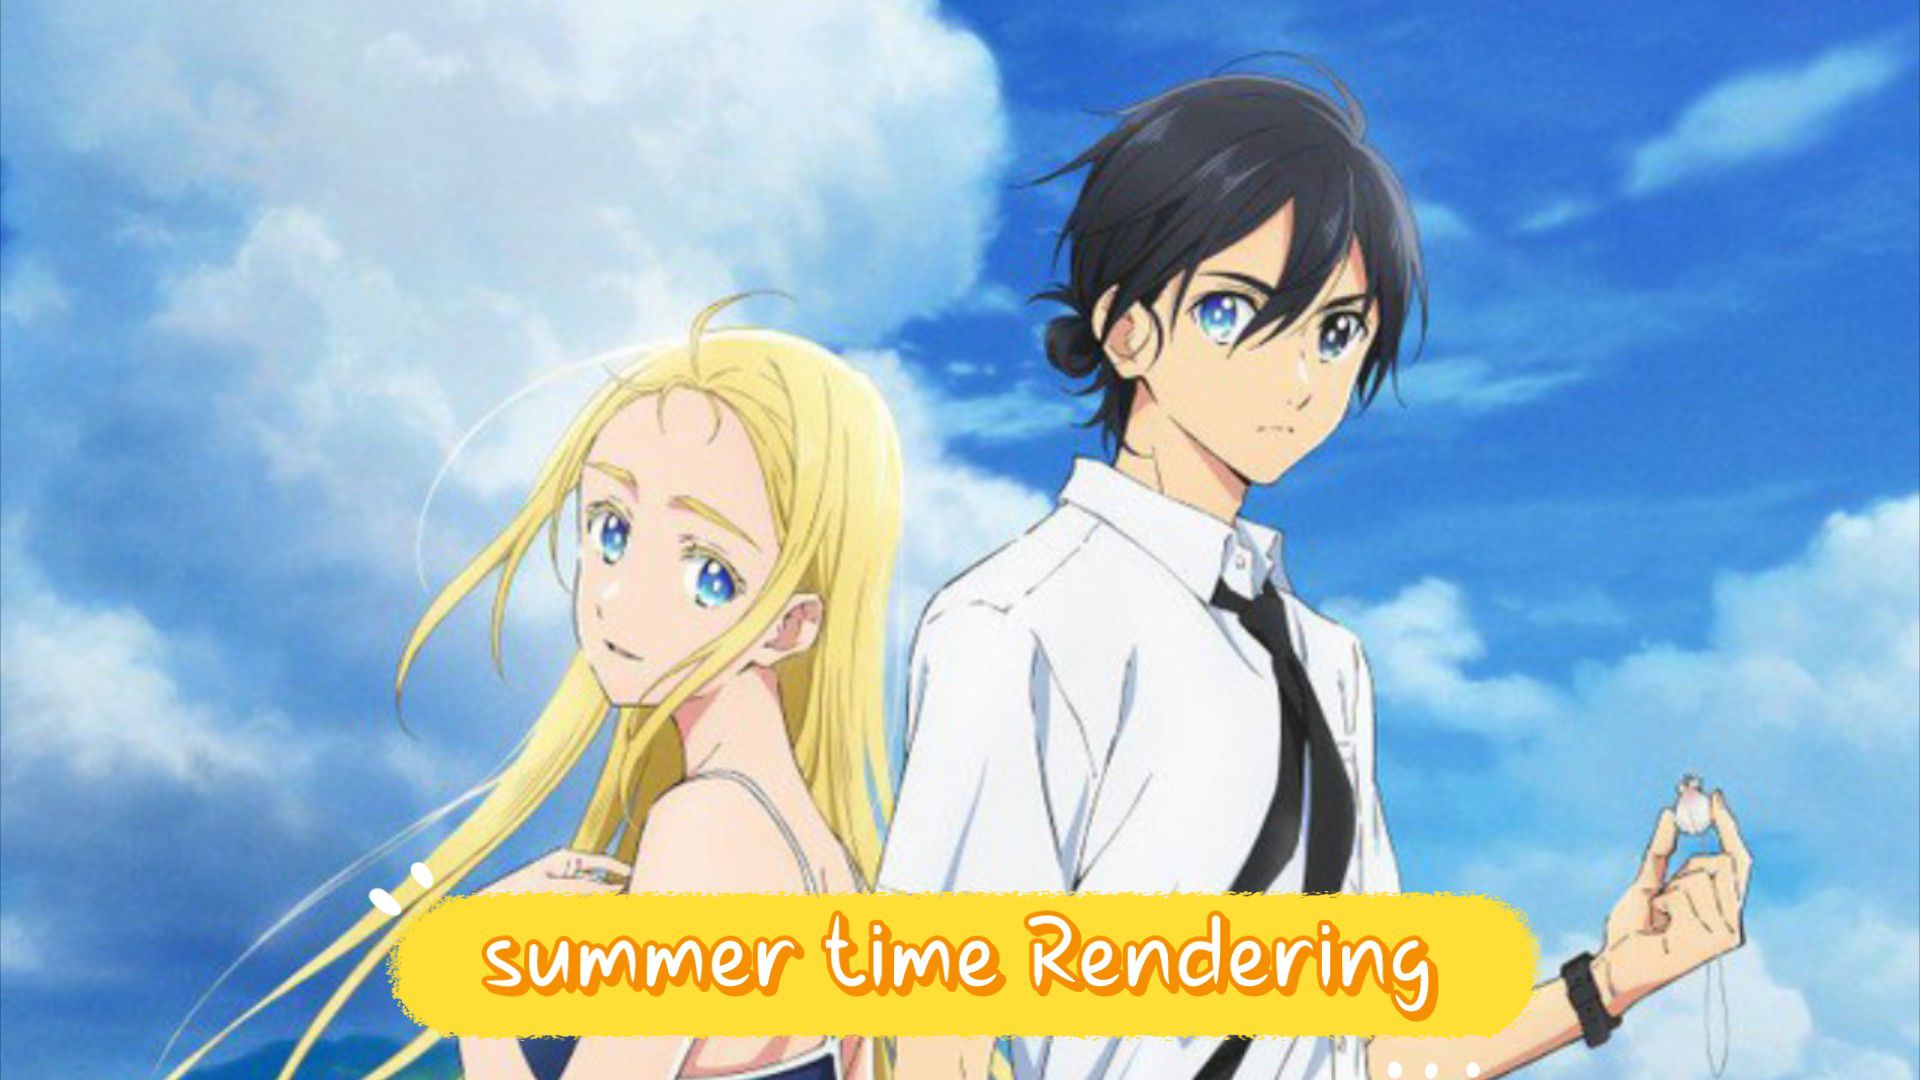 Summer Time Rendering Episode 14 Release Date & Time